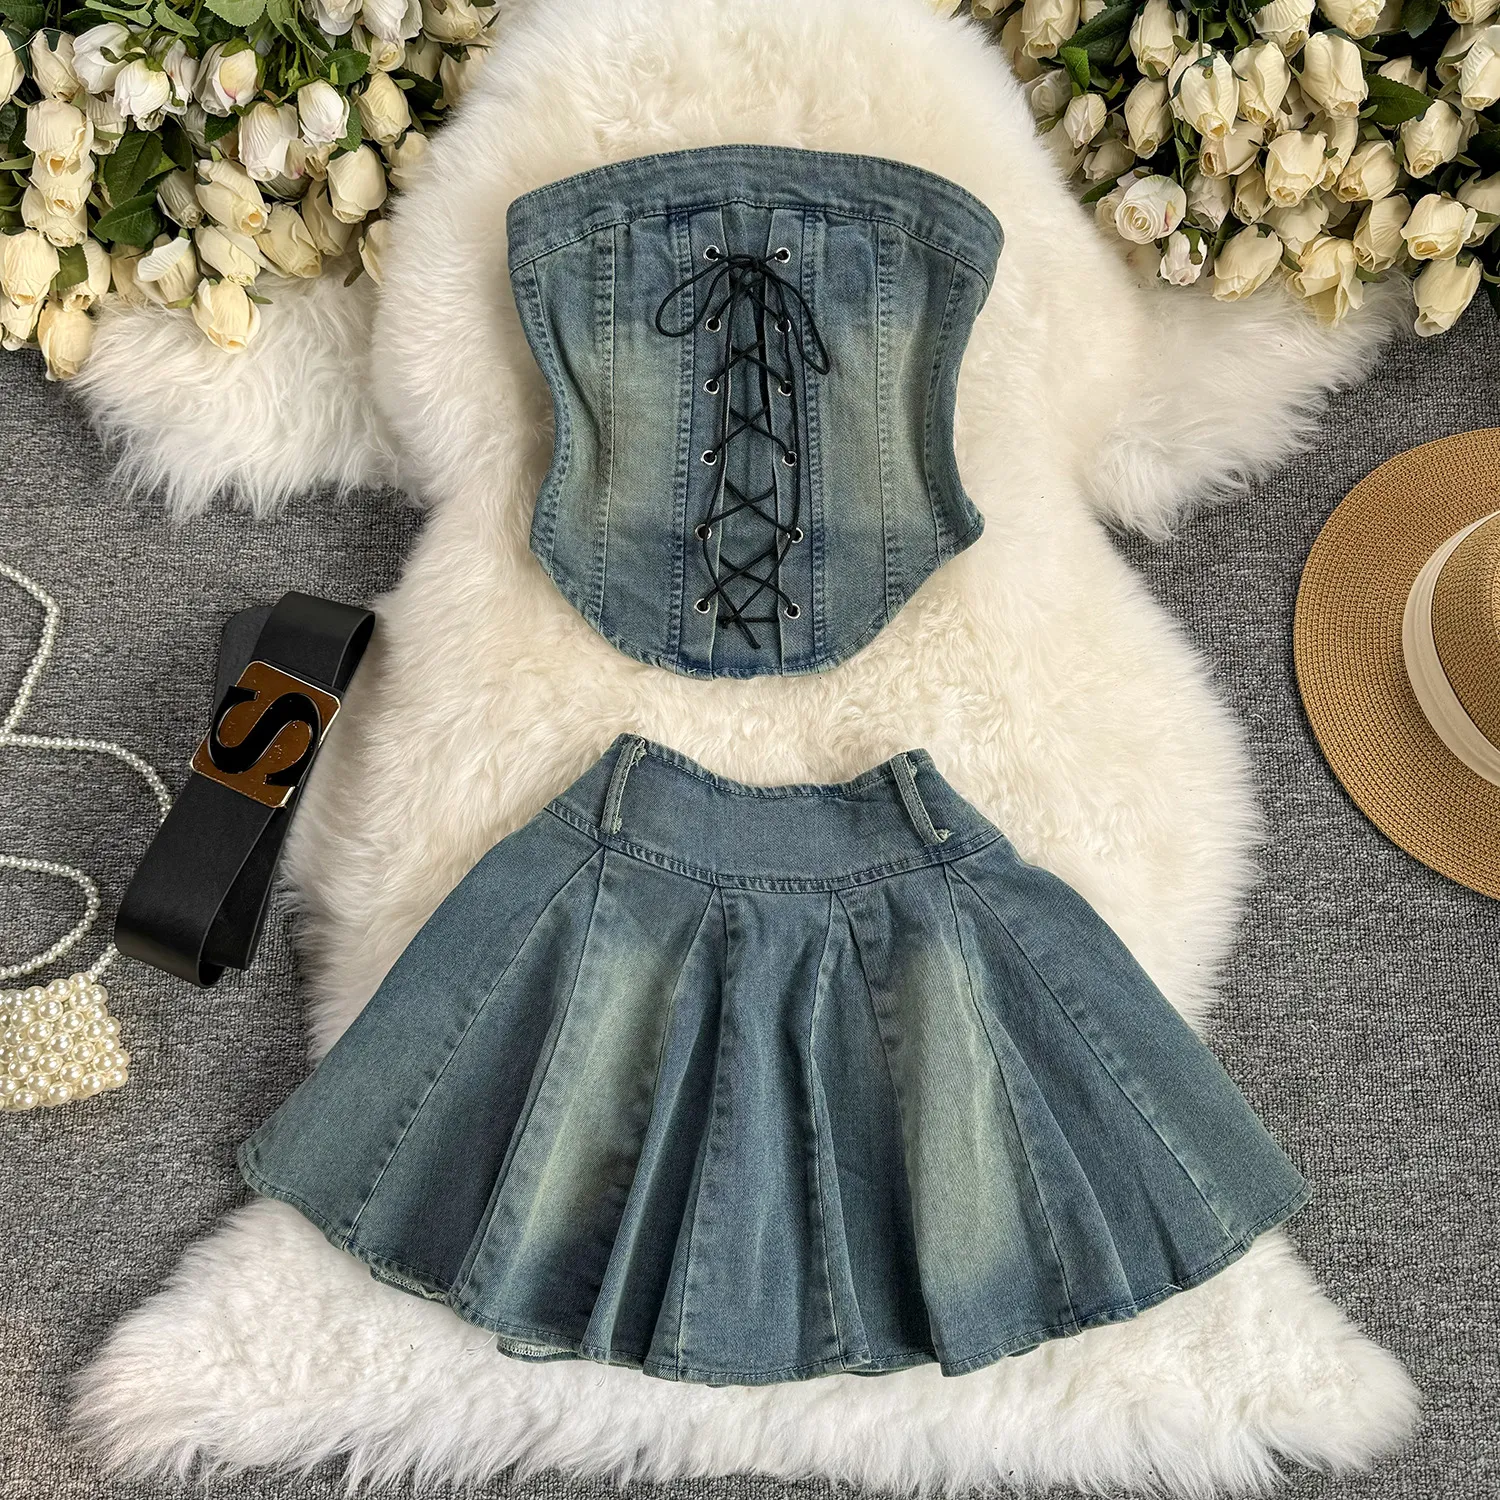 Summer fashion spicy girl style design with cross tie strapless denim top pleated skirt short skirt set for women